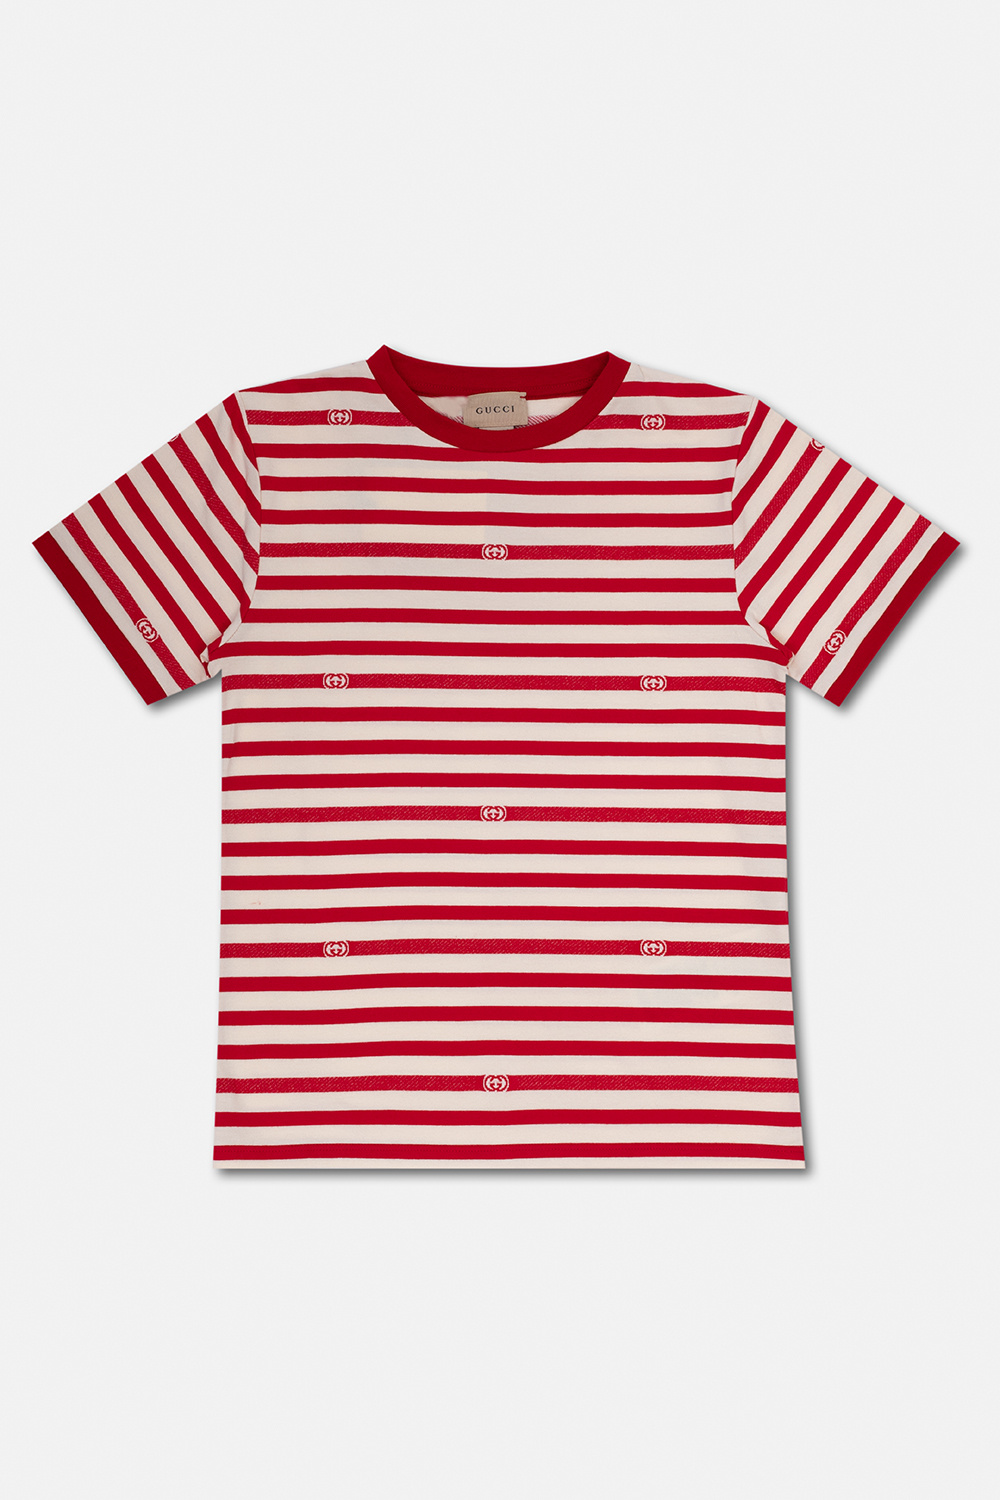 Gucci Kids T-shirt with Herbstbl